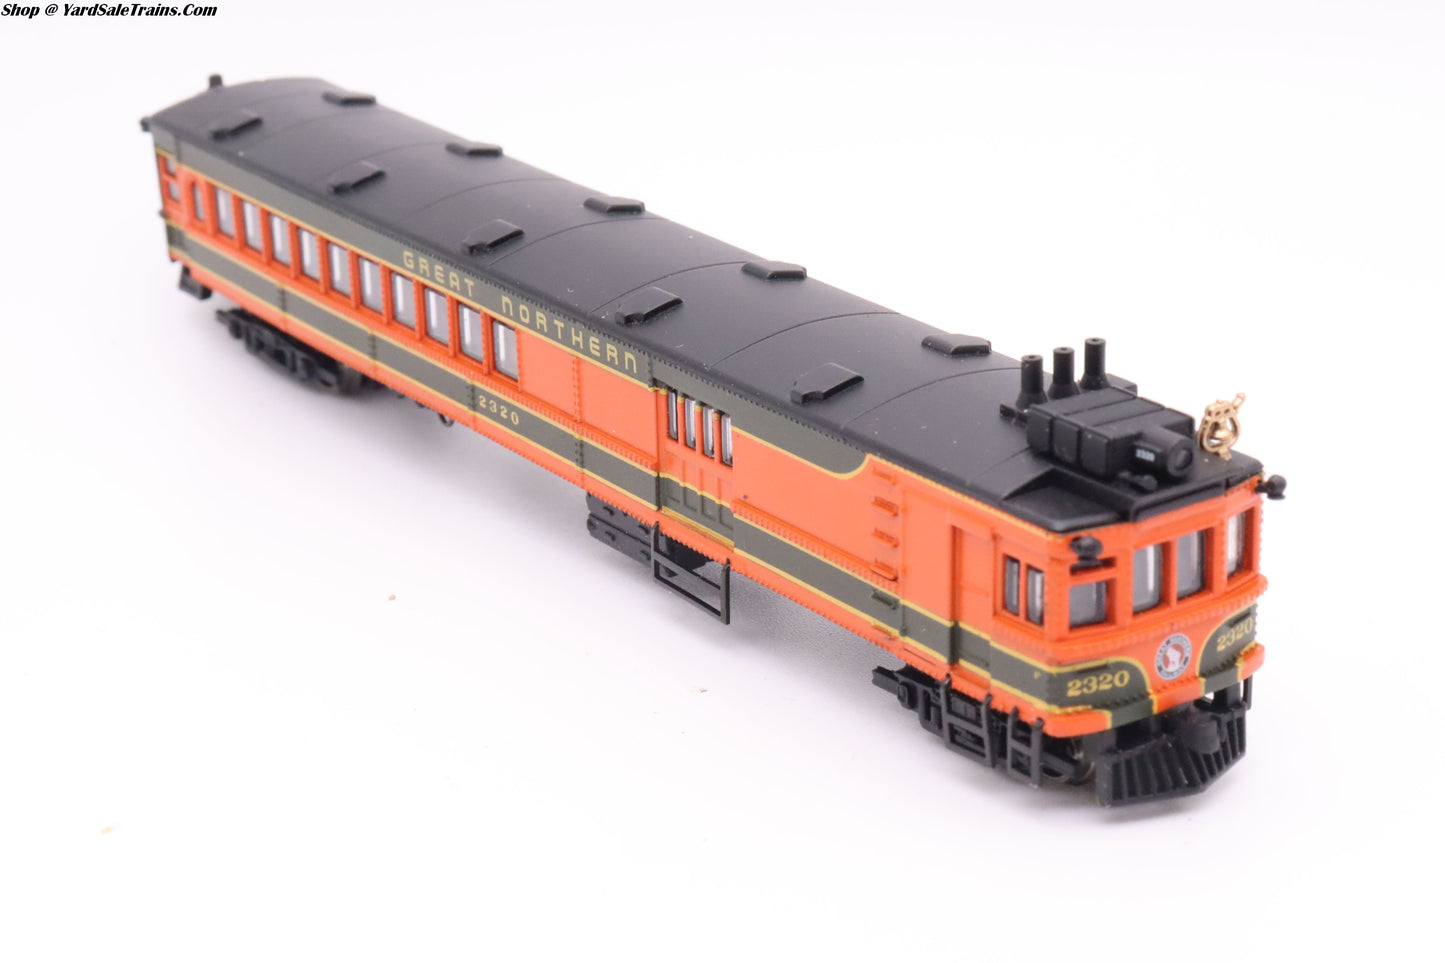 BCH-81457 - Spectrum Doodlebug EMC Gas Electric - Great Northern - GN #2320 - N Scale - Preowned